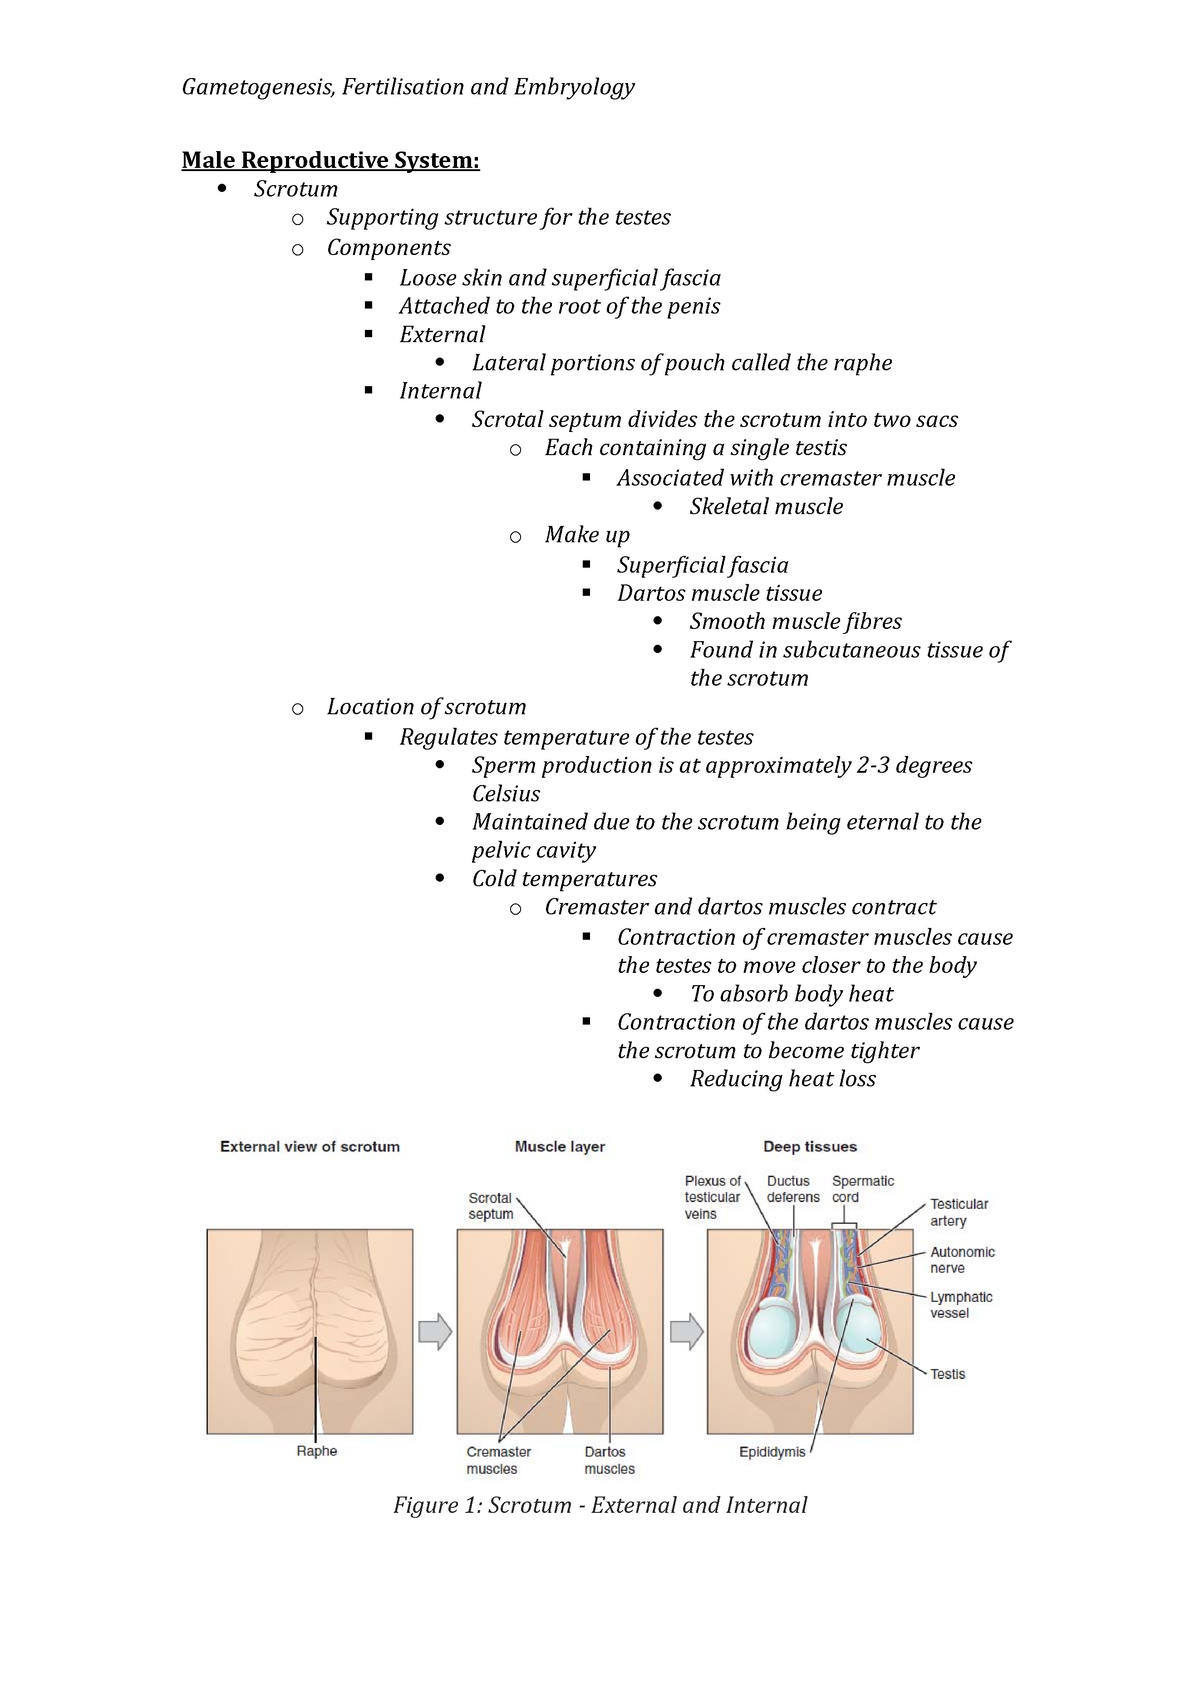 Male Reproductive System Lecture Notes Male Reproductive System Scrotum O Supporting 6296